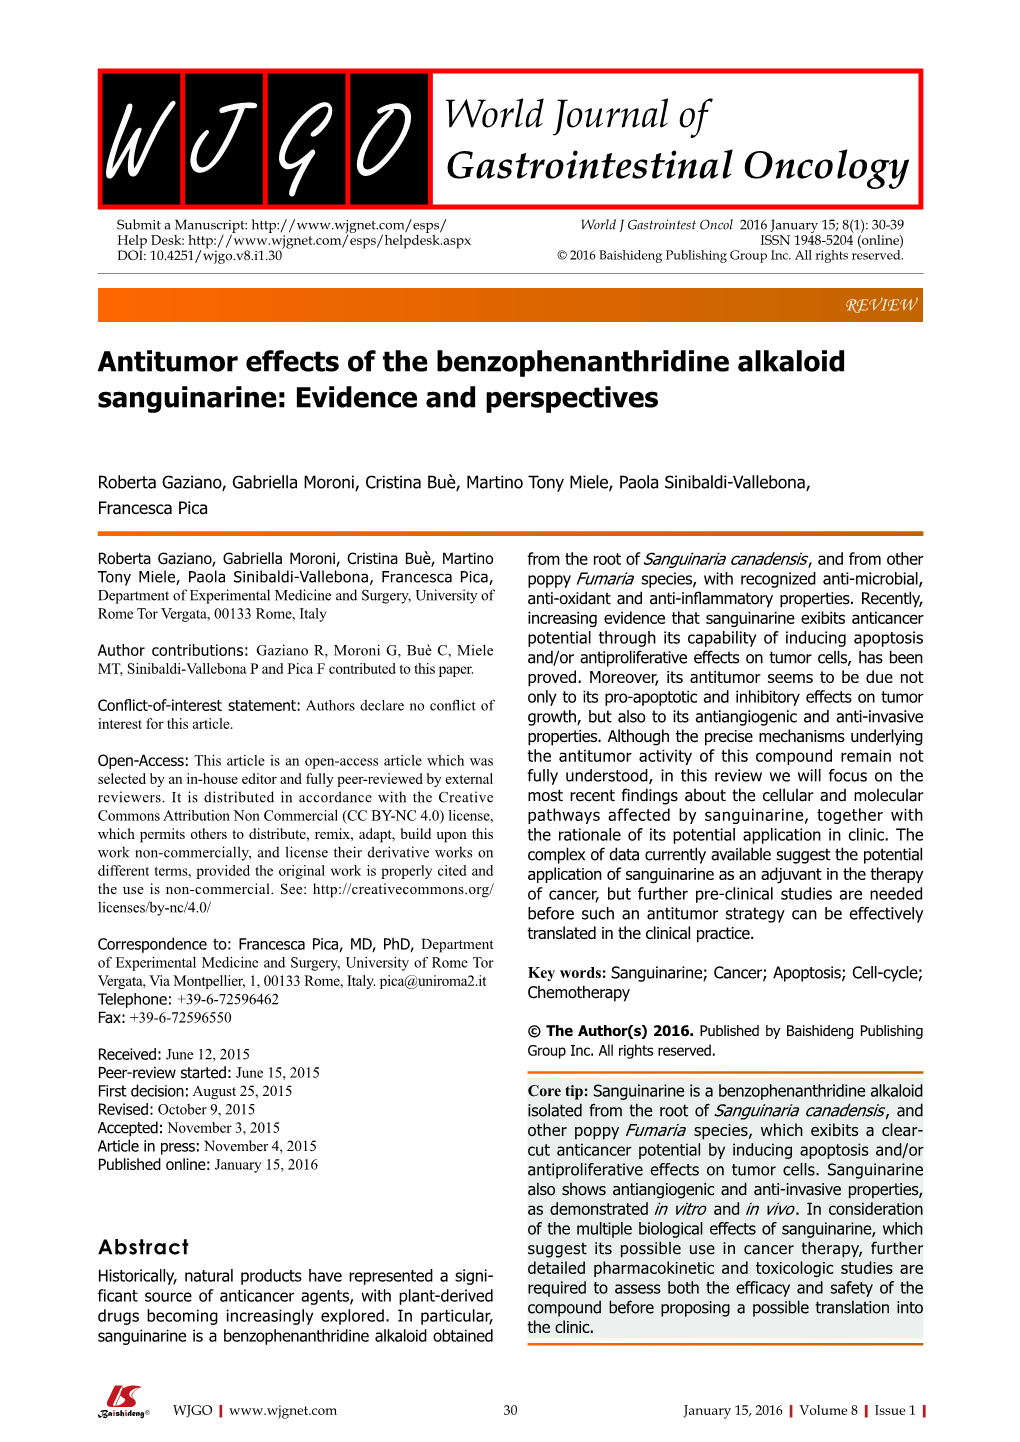 Antitumor Effects of the Benzophenanthridine Alkaloid Sanguinarine: Evidence and Perspectives